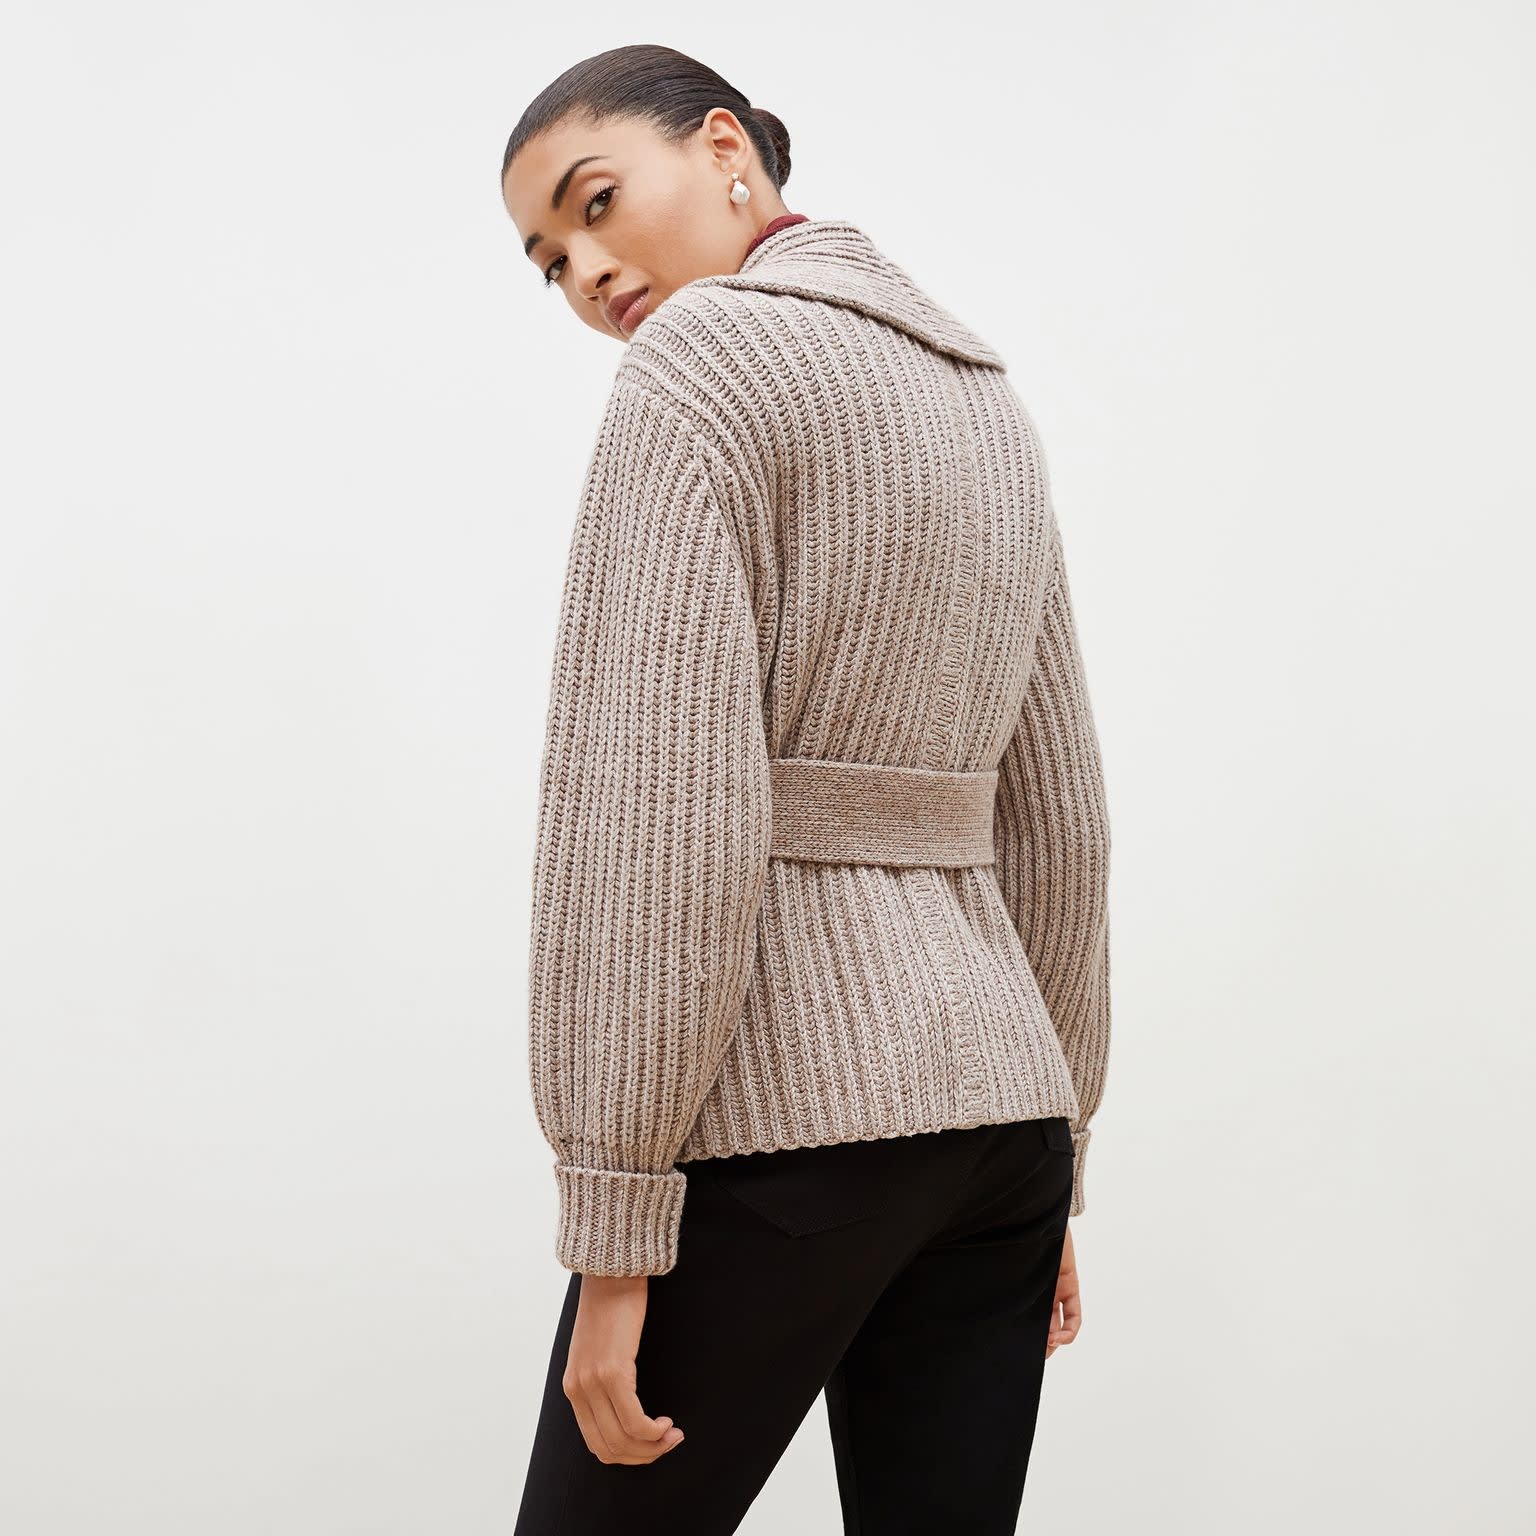 Back image of a woman standing wearing the Snyder Jacket—Lush Merino in Barley